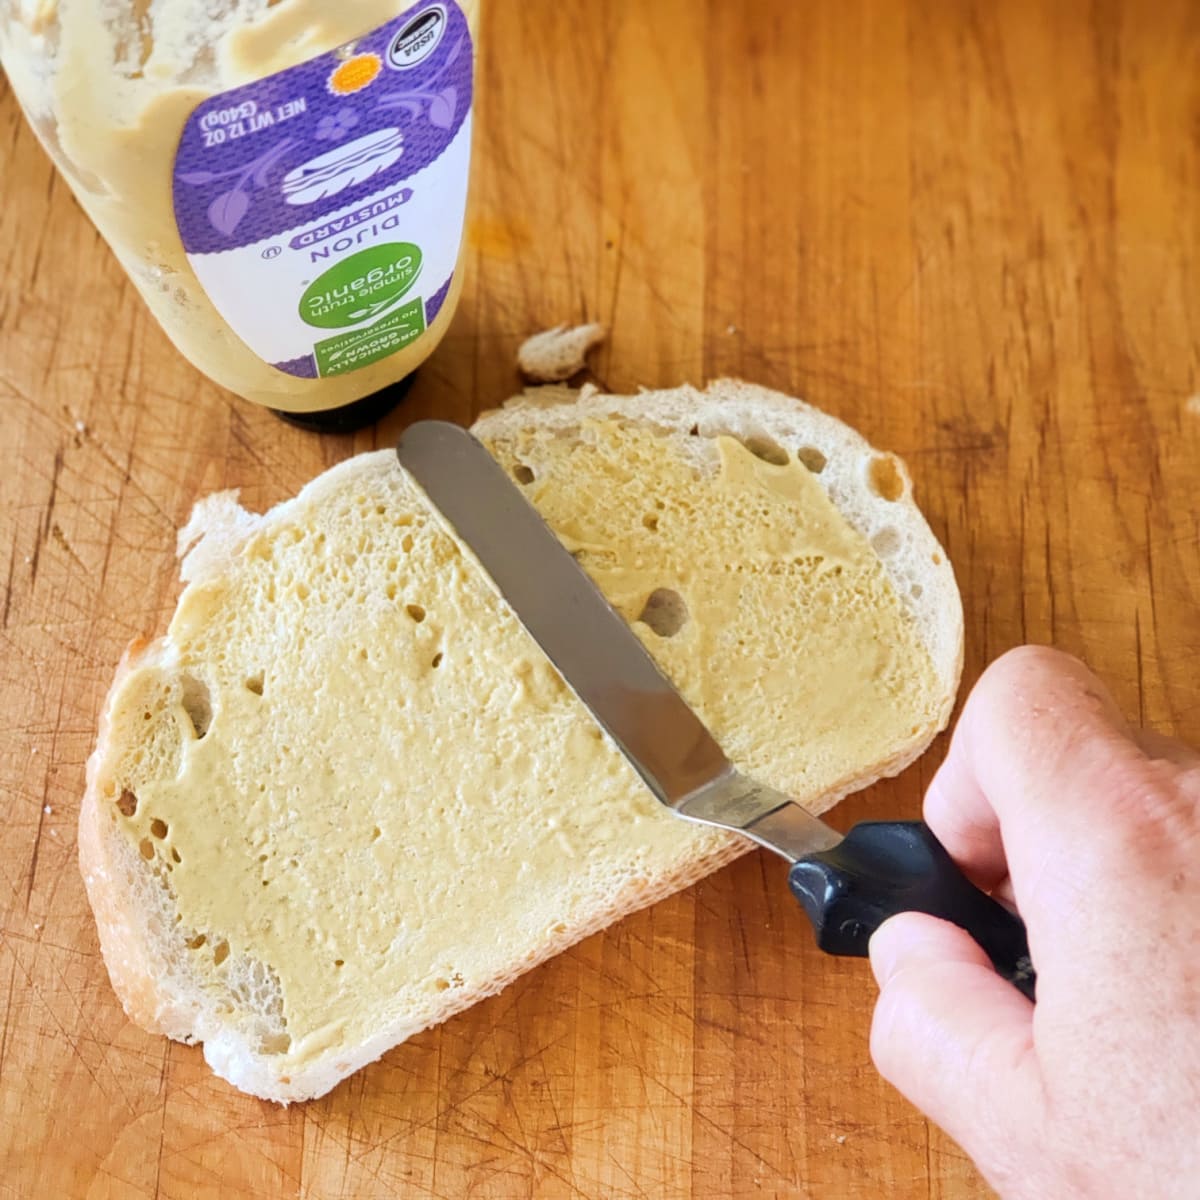 Spreading Dijon mustard on a sliced of sourdough bread with an offset spatula